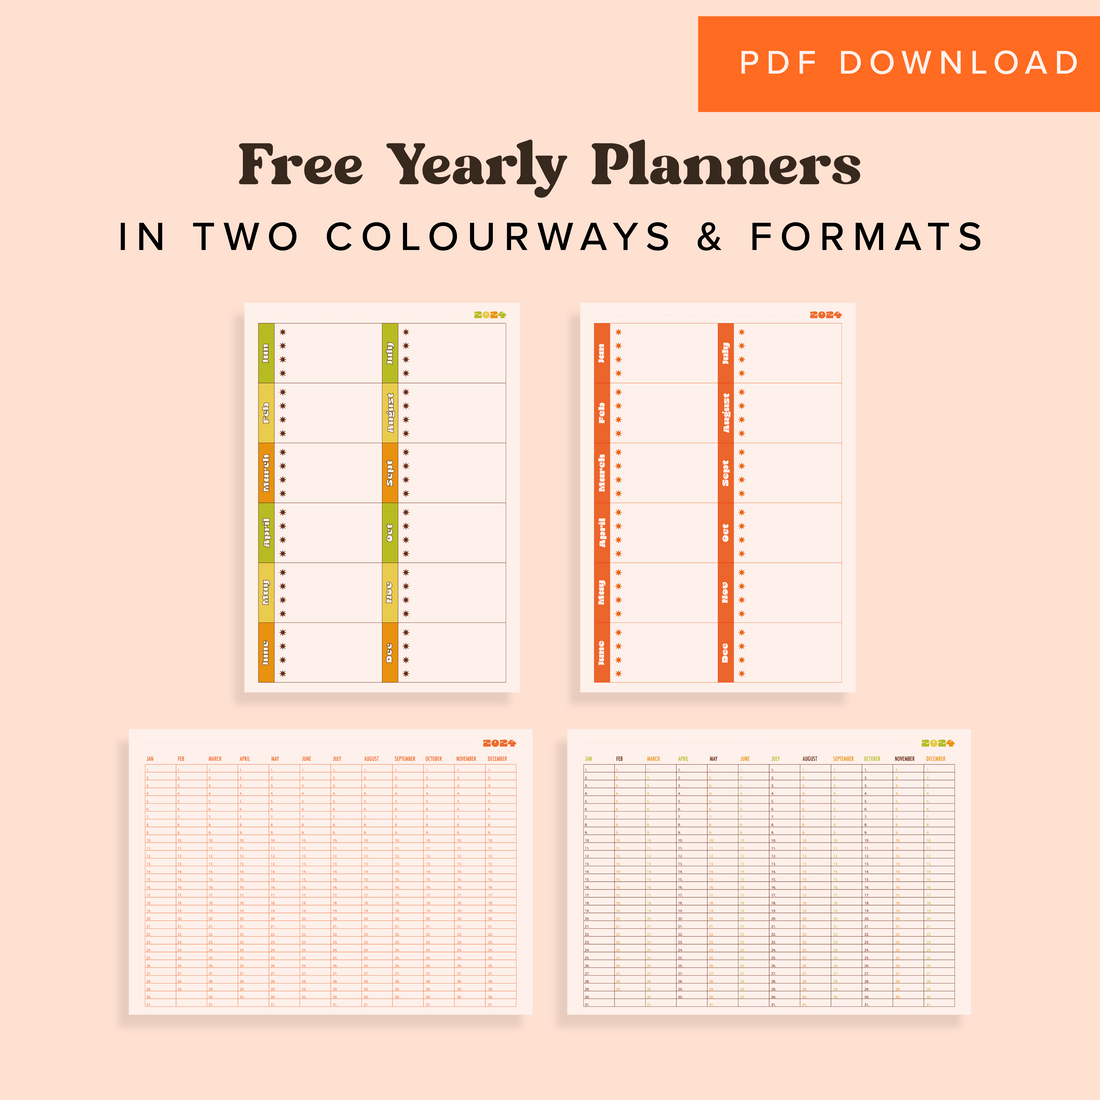 Free Download: Yearly Planner